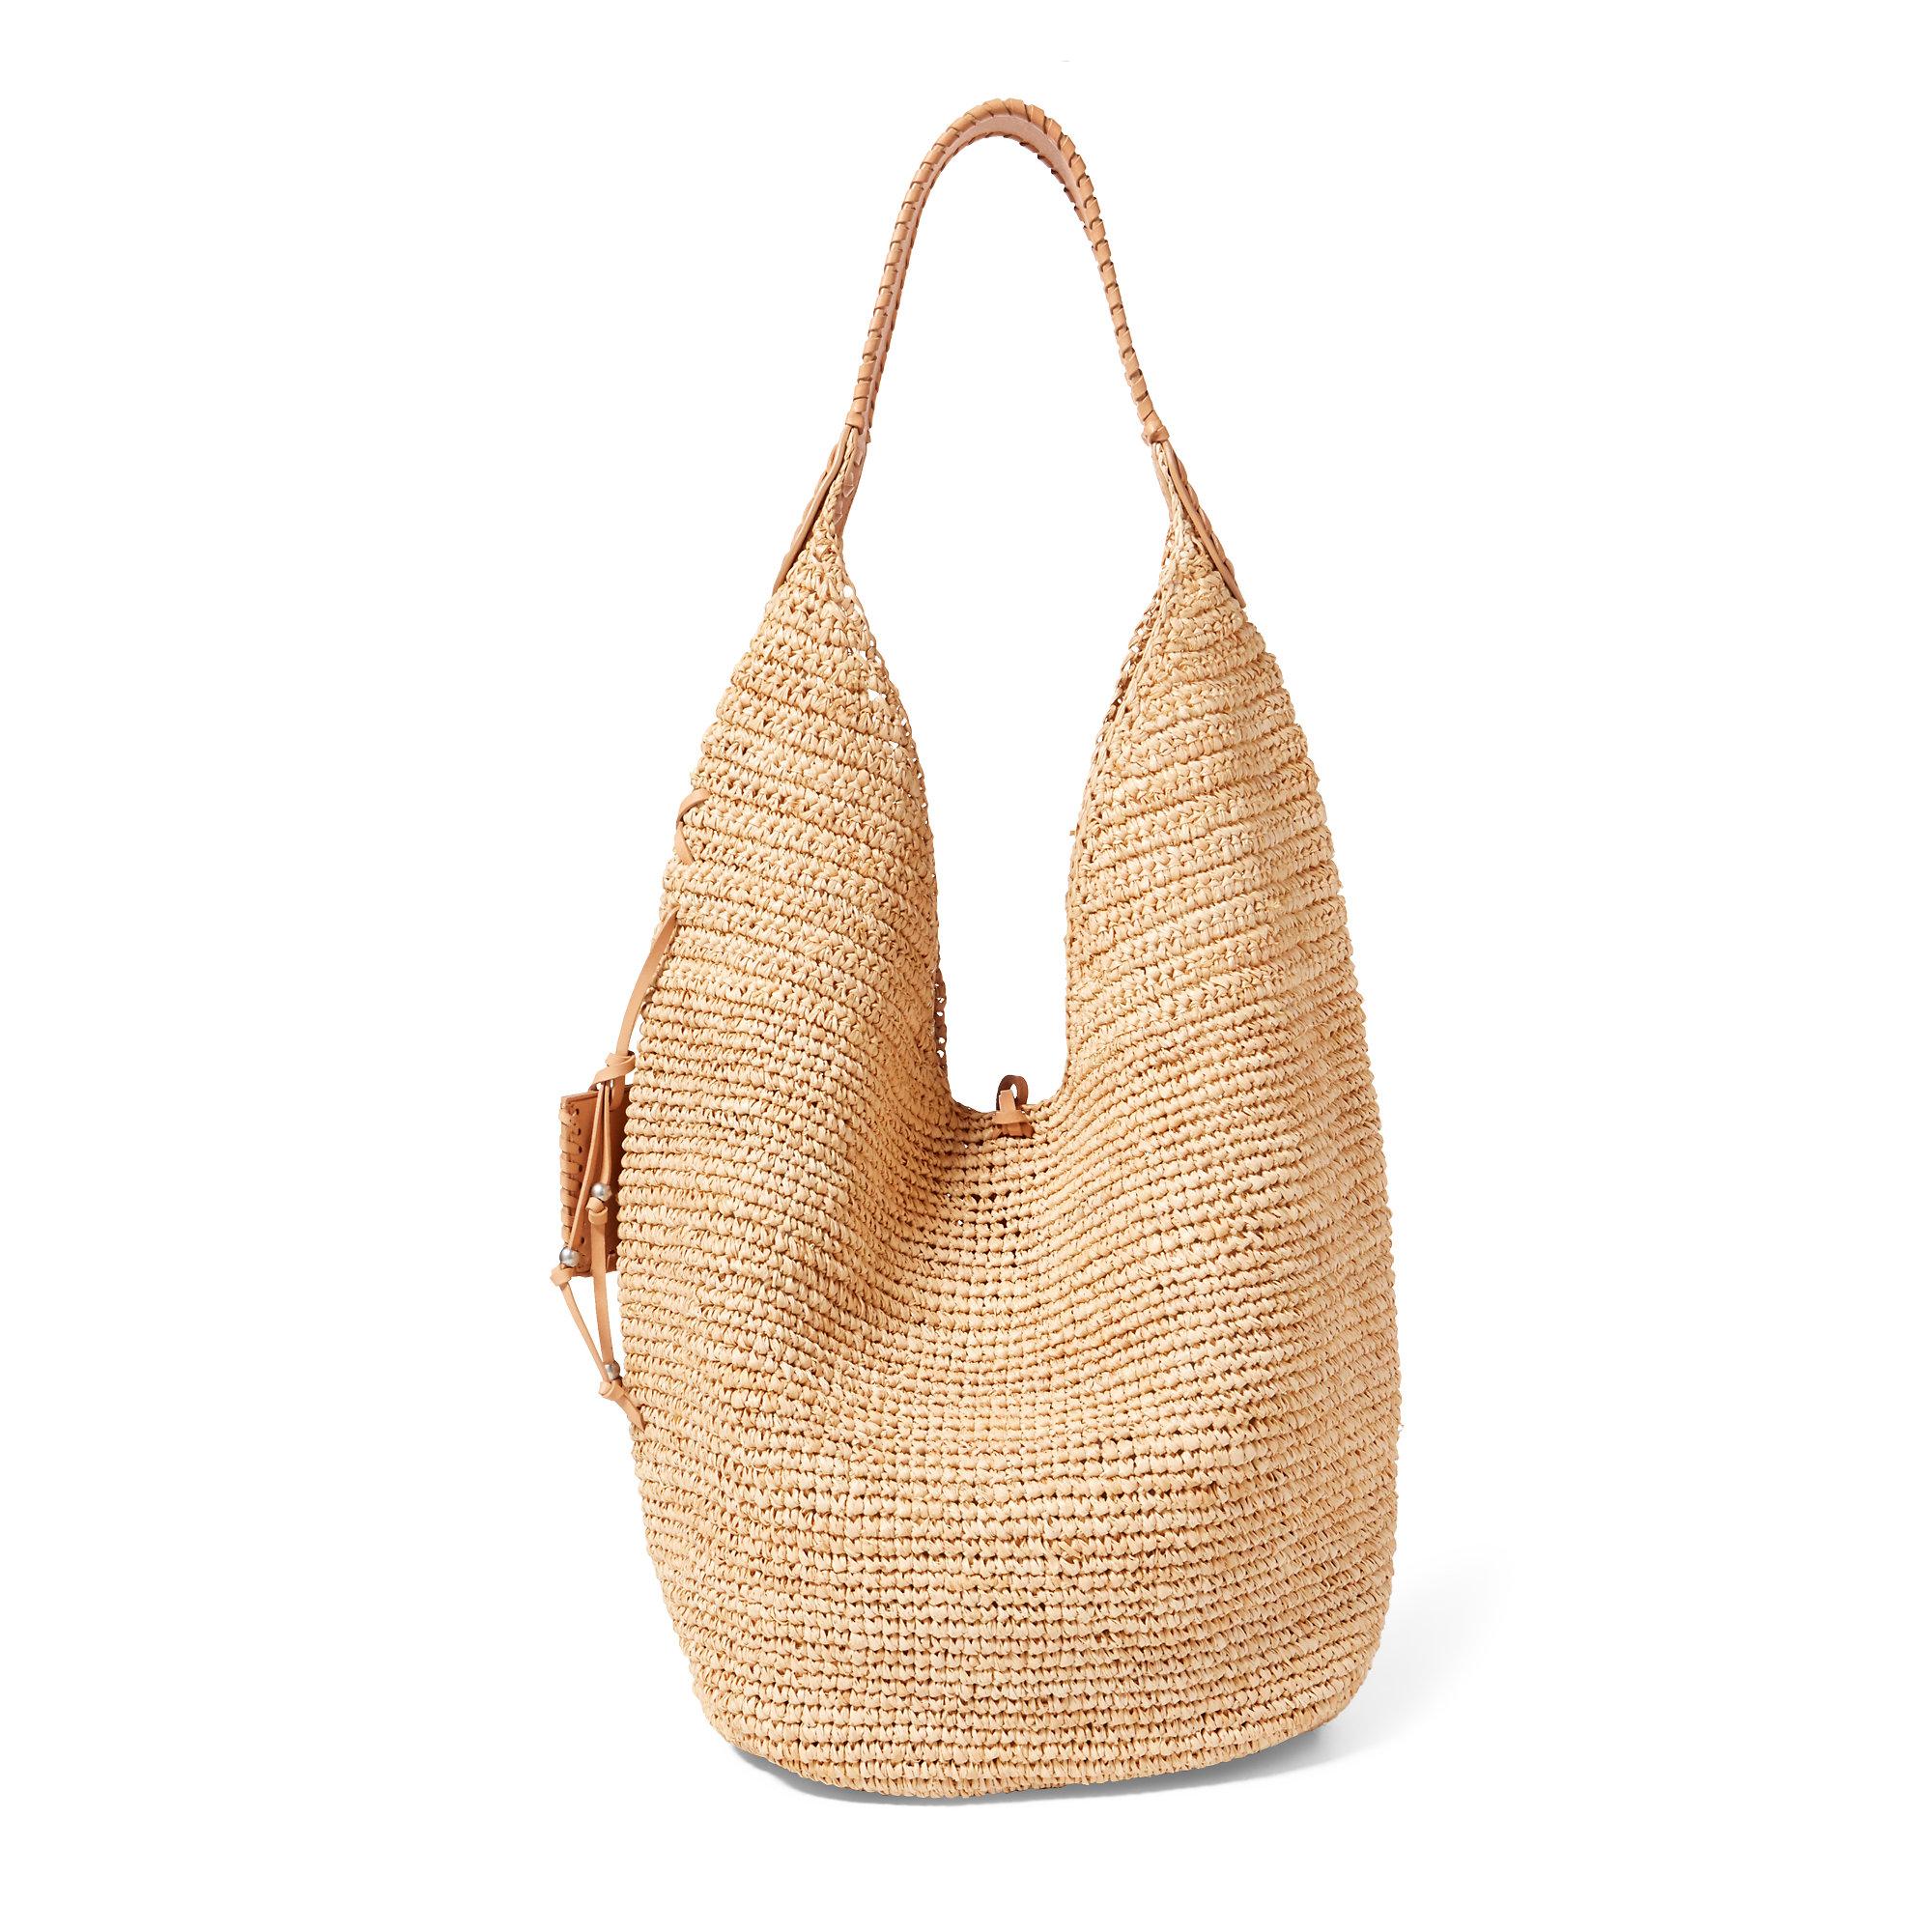 Polo Ralph Lauren Leather Raffia Hobo Bag in Natural - Lyst